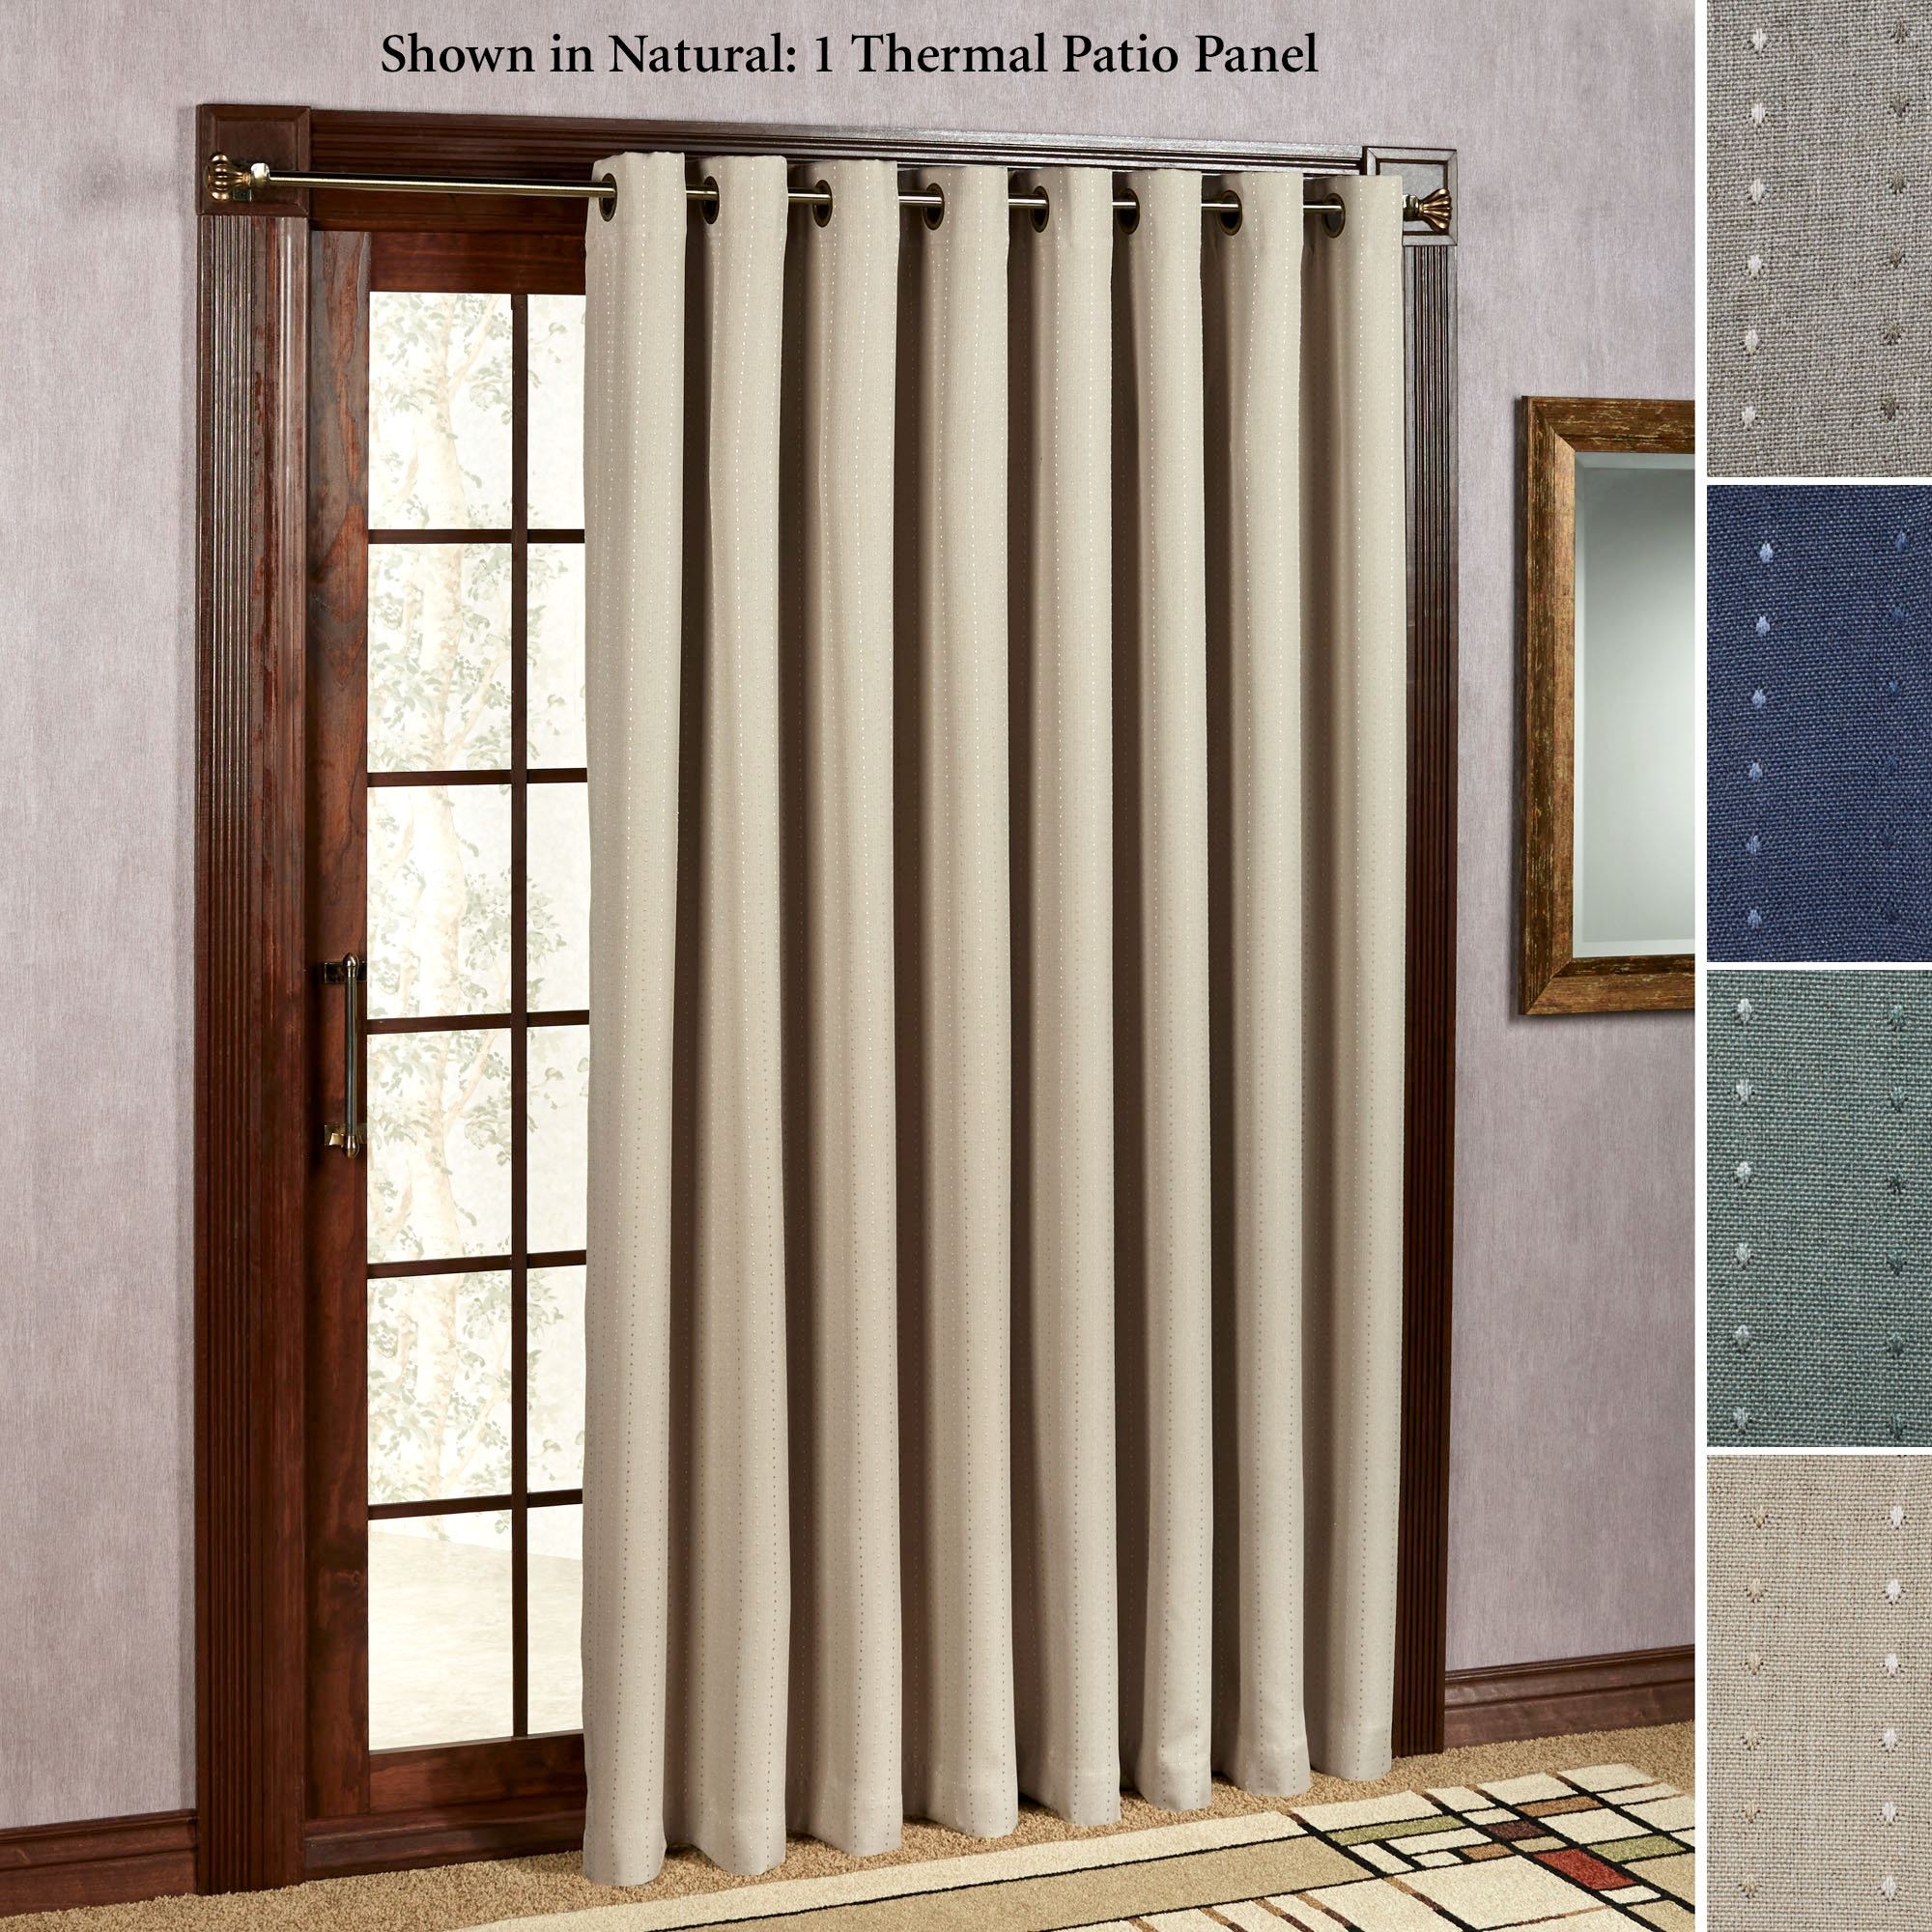 Curtains For Sliding Patio DoorsCurtains For Sliding Patio Doors